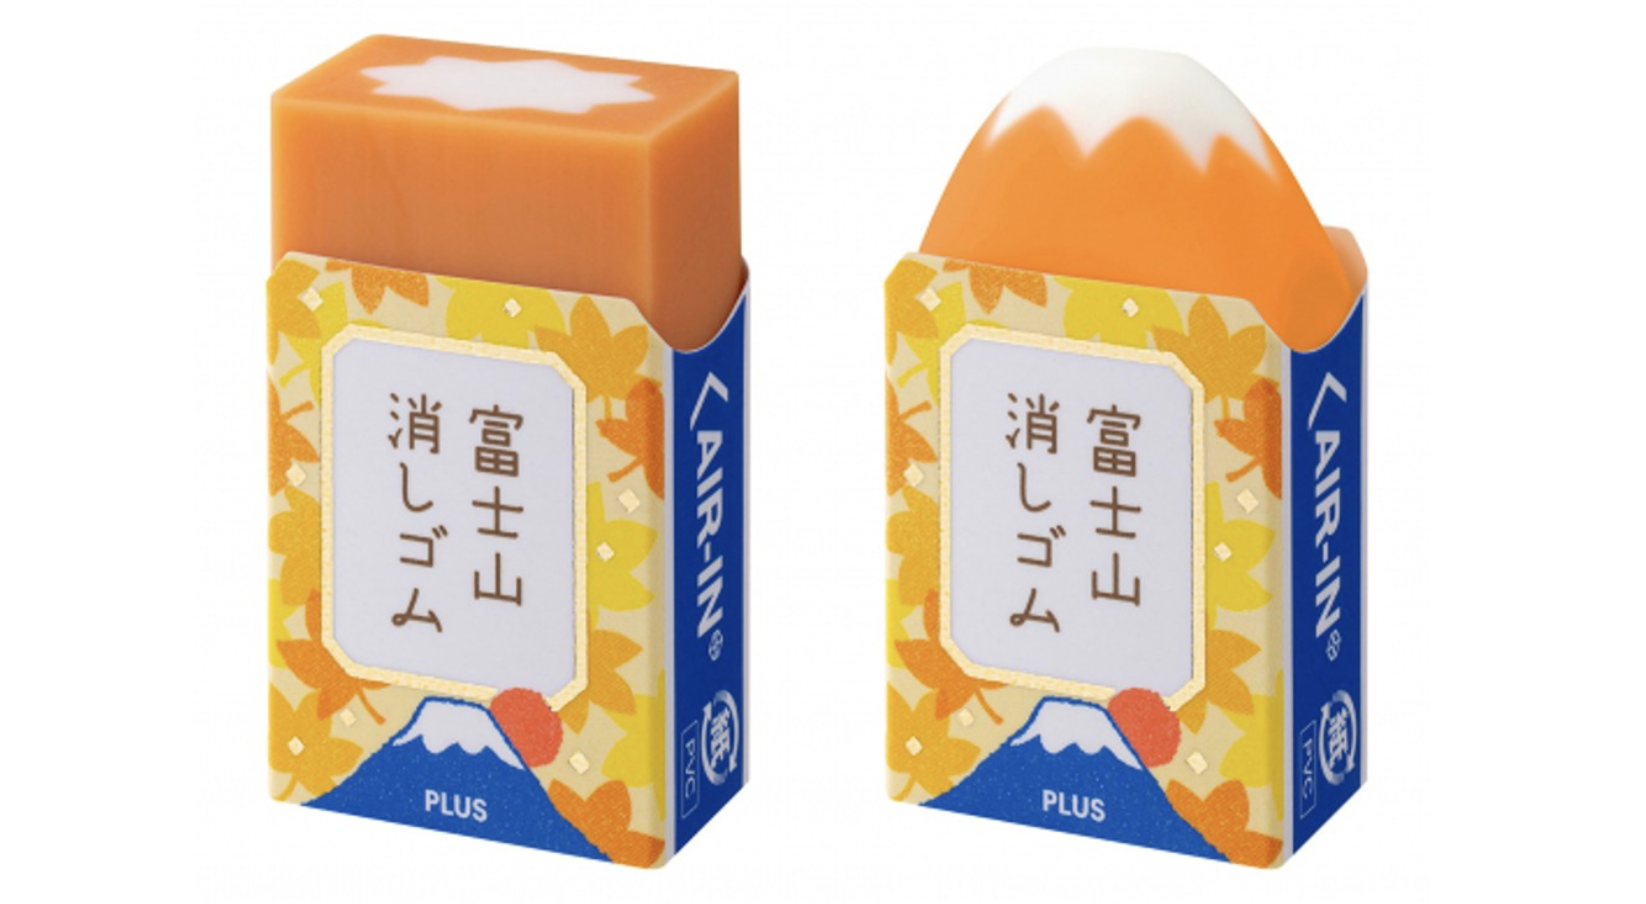 Every mistake you make reveals Mt Fuji with these clever